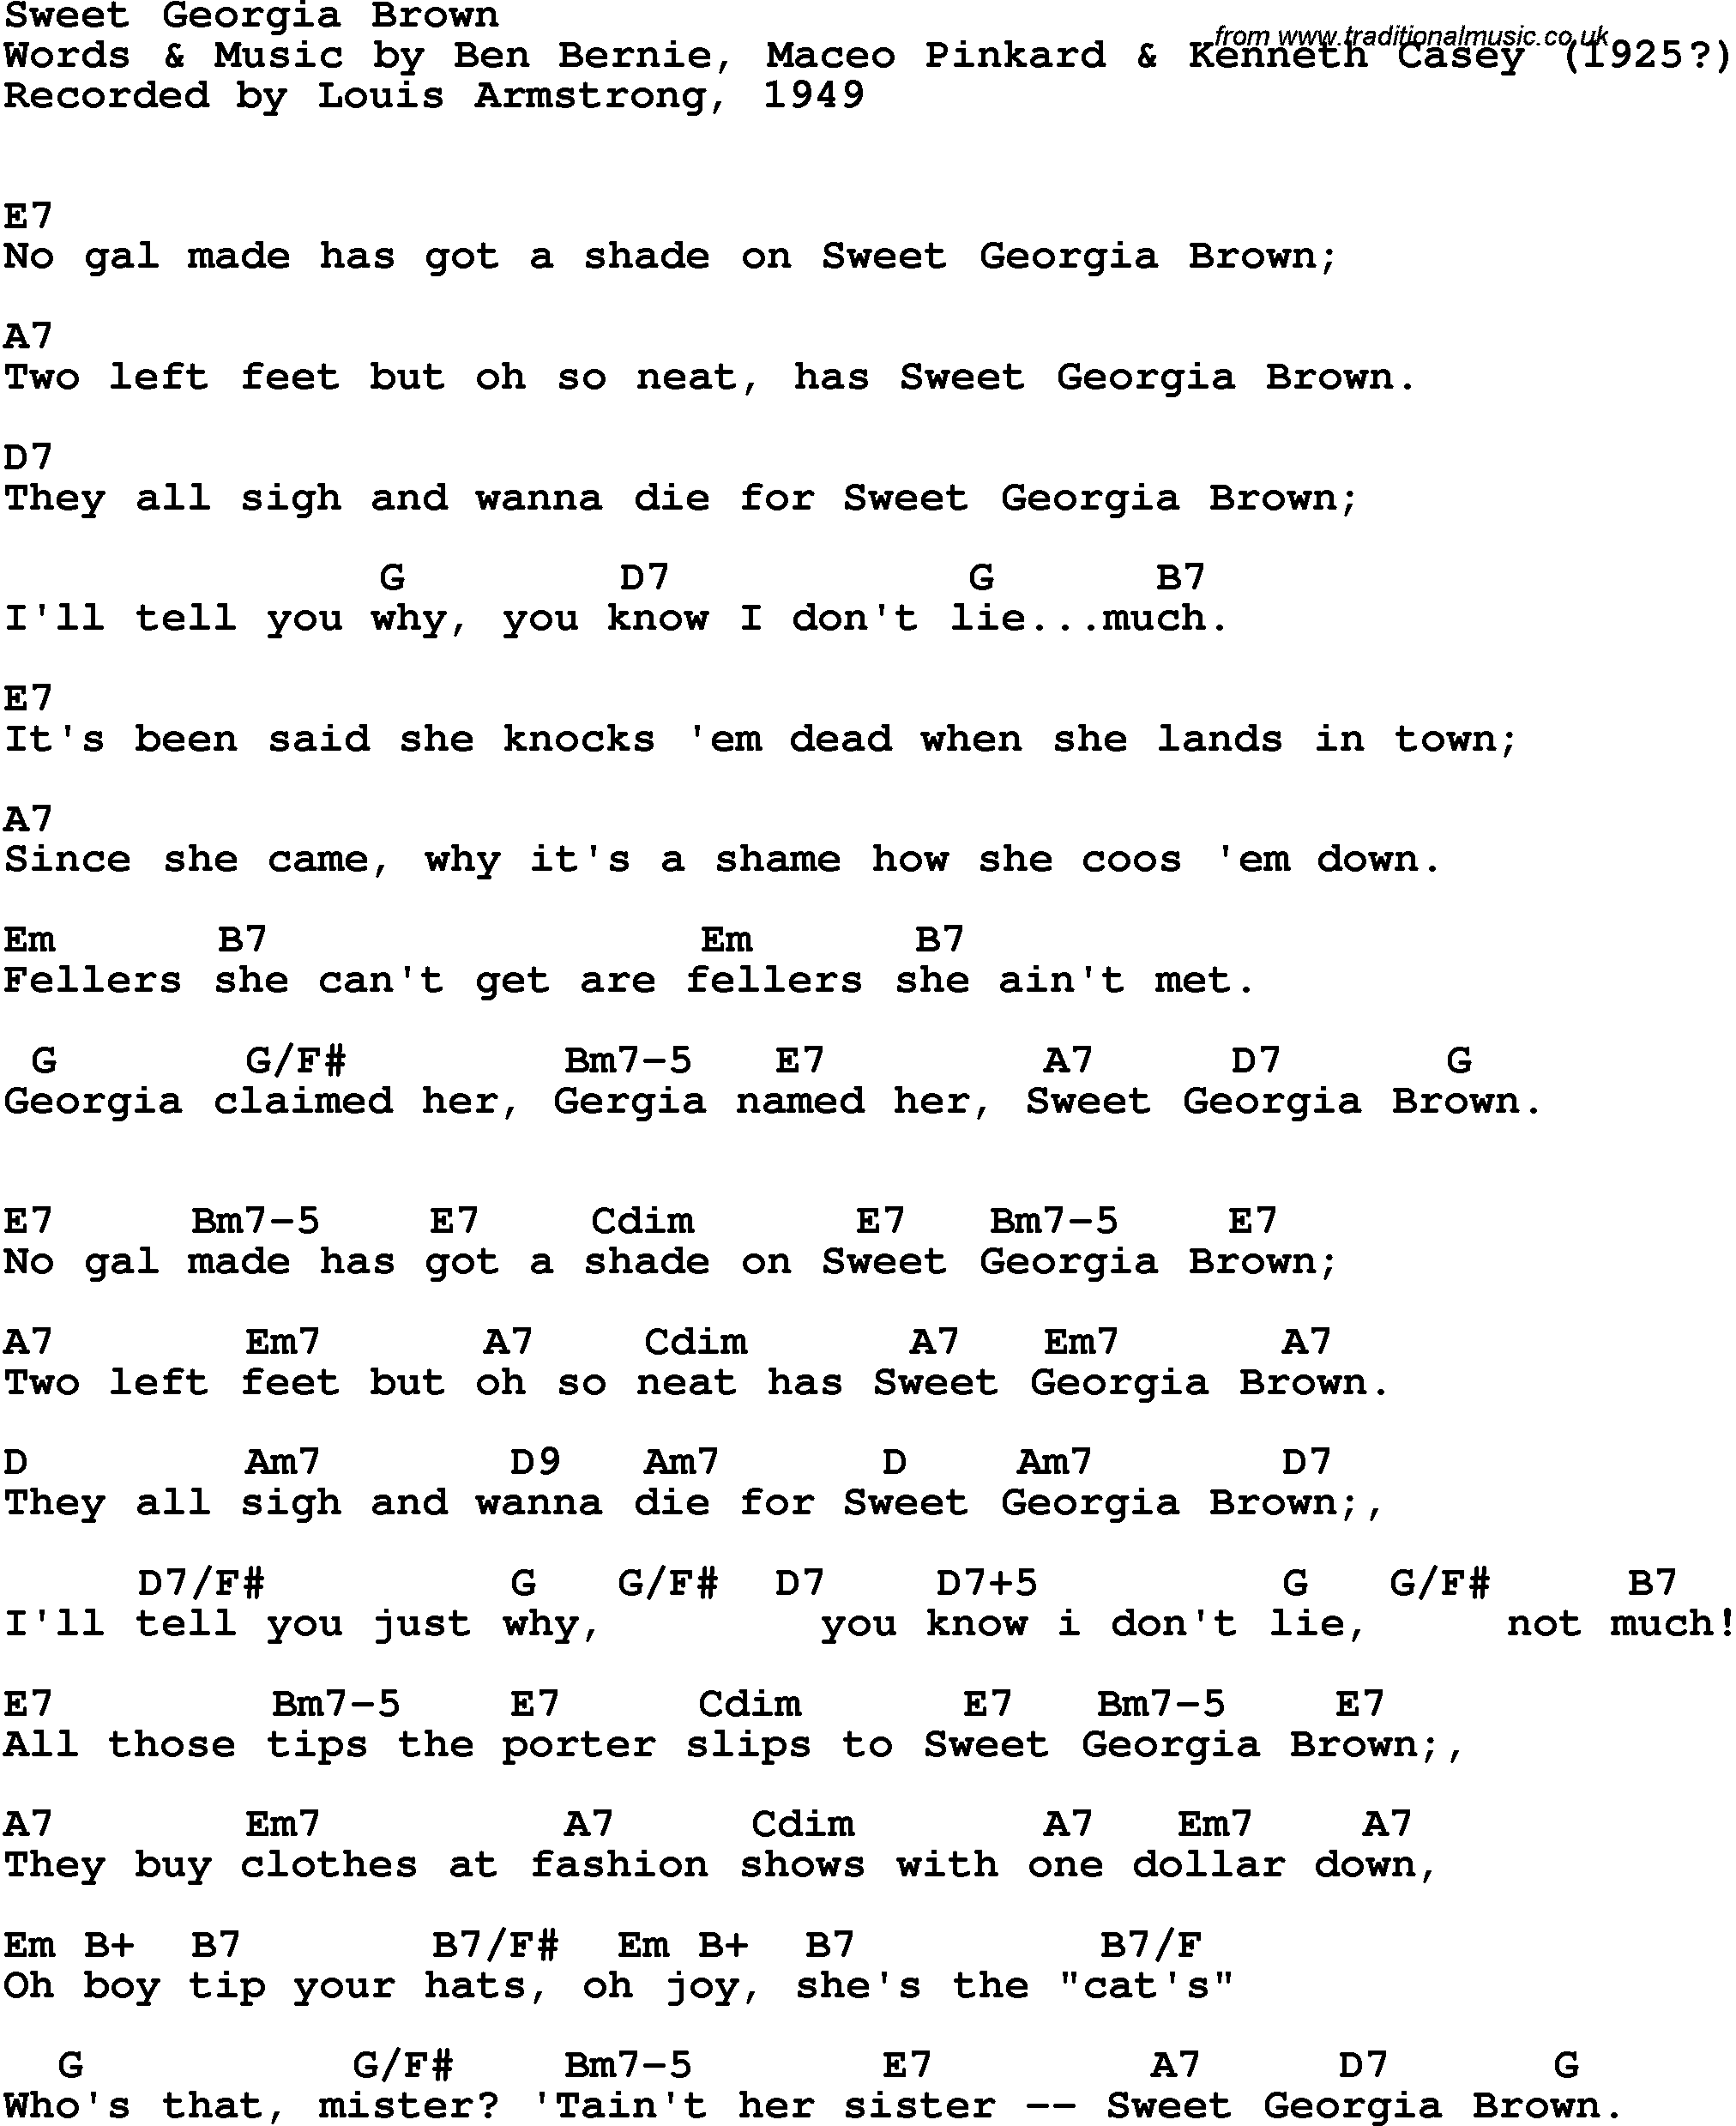 Song Lyrics with guitar chords for Sweet Georgia Brown - Louis Armstrong, 1949